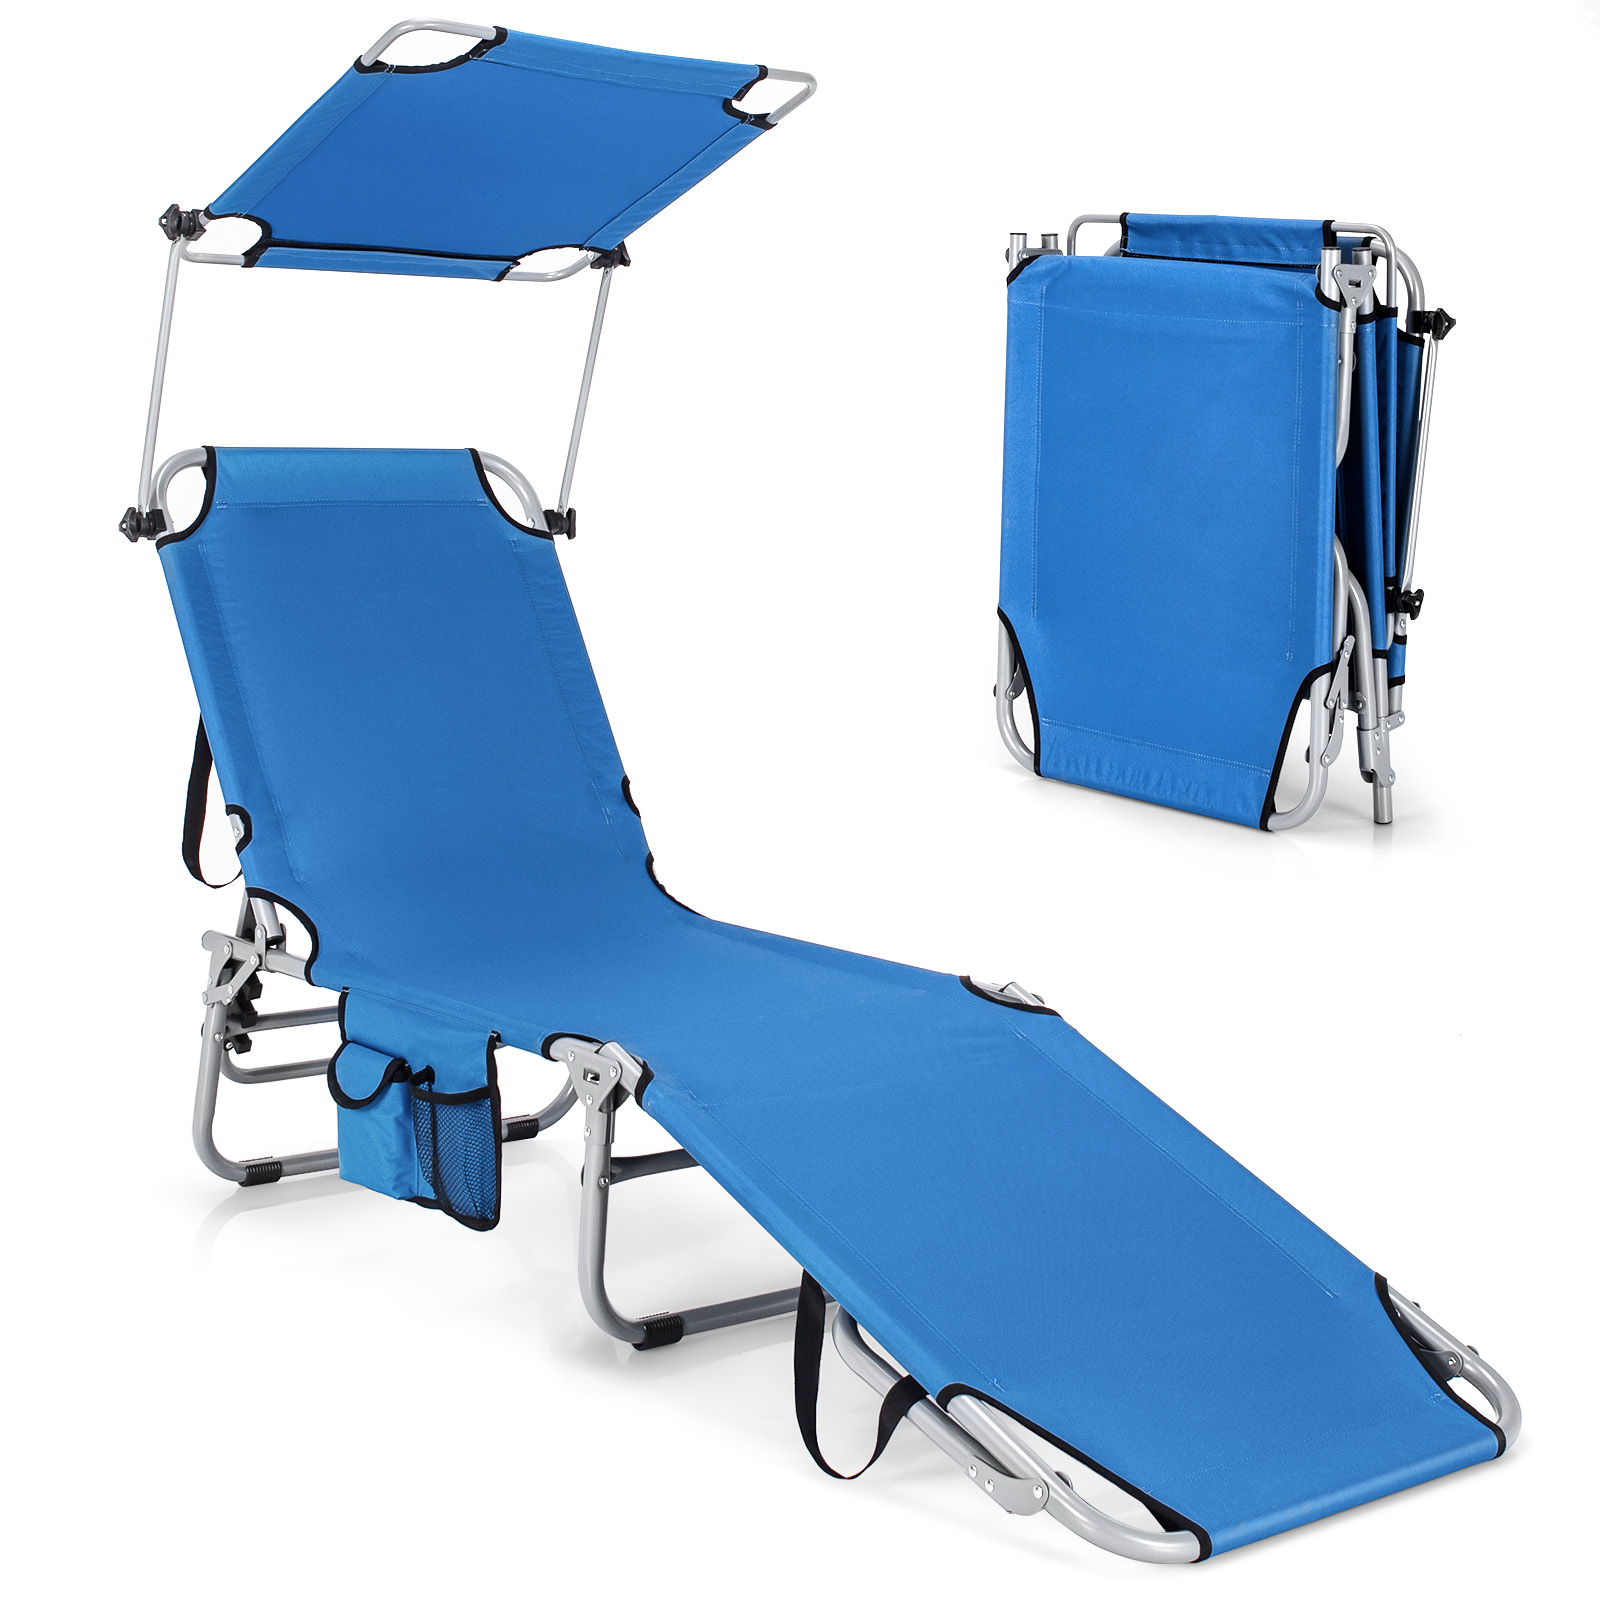 Topbuy Foldable Sun Shading Chaise Lounge Chair Adjustable Beach Recliner Blue - image 1 of 10